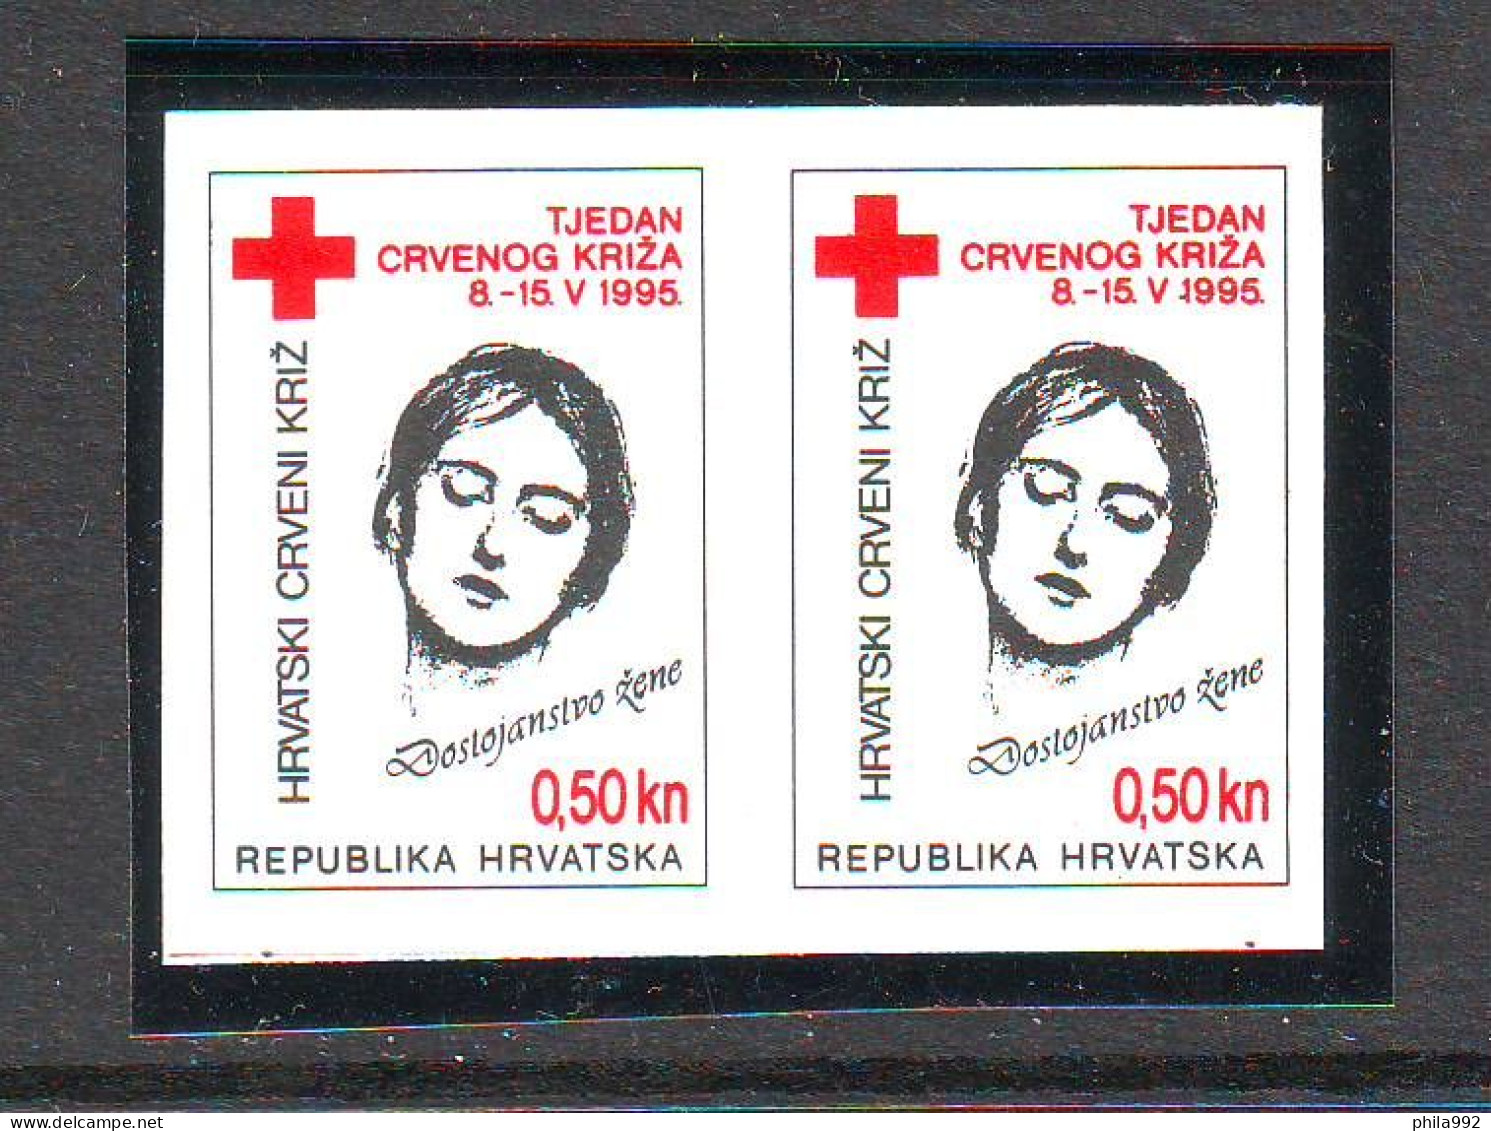 Croatia 1995 Charity Stamp Mi.No.63 RED CROSS  Imperforated Pair  MNH - Croatie